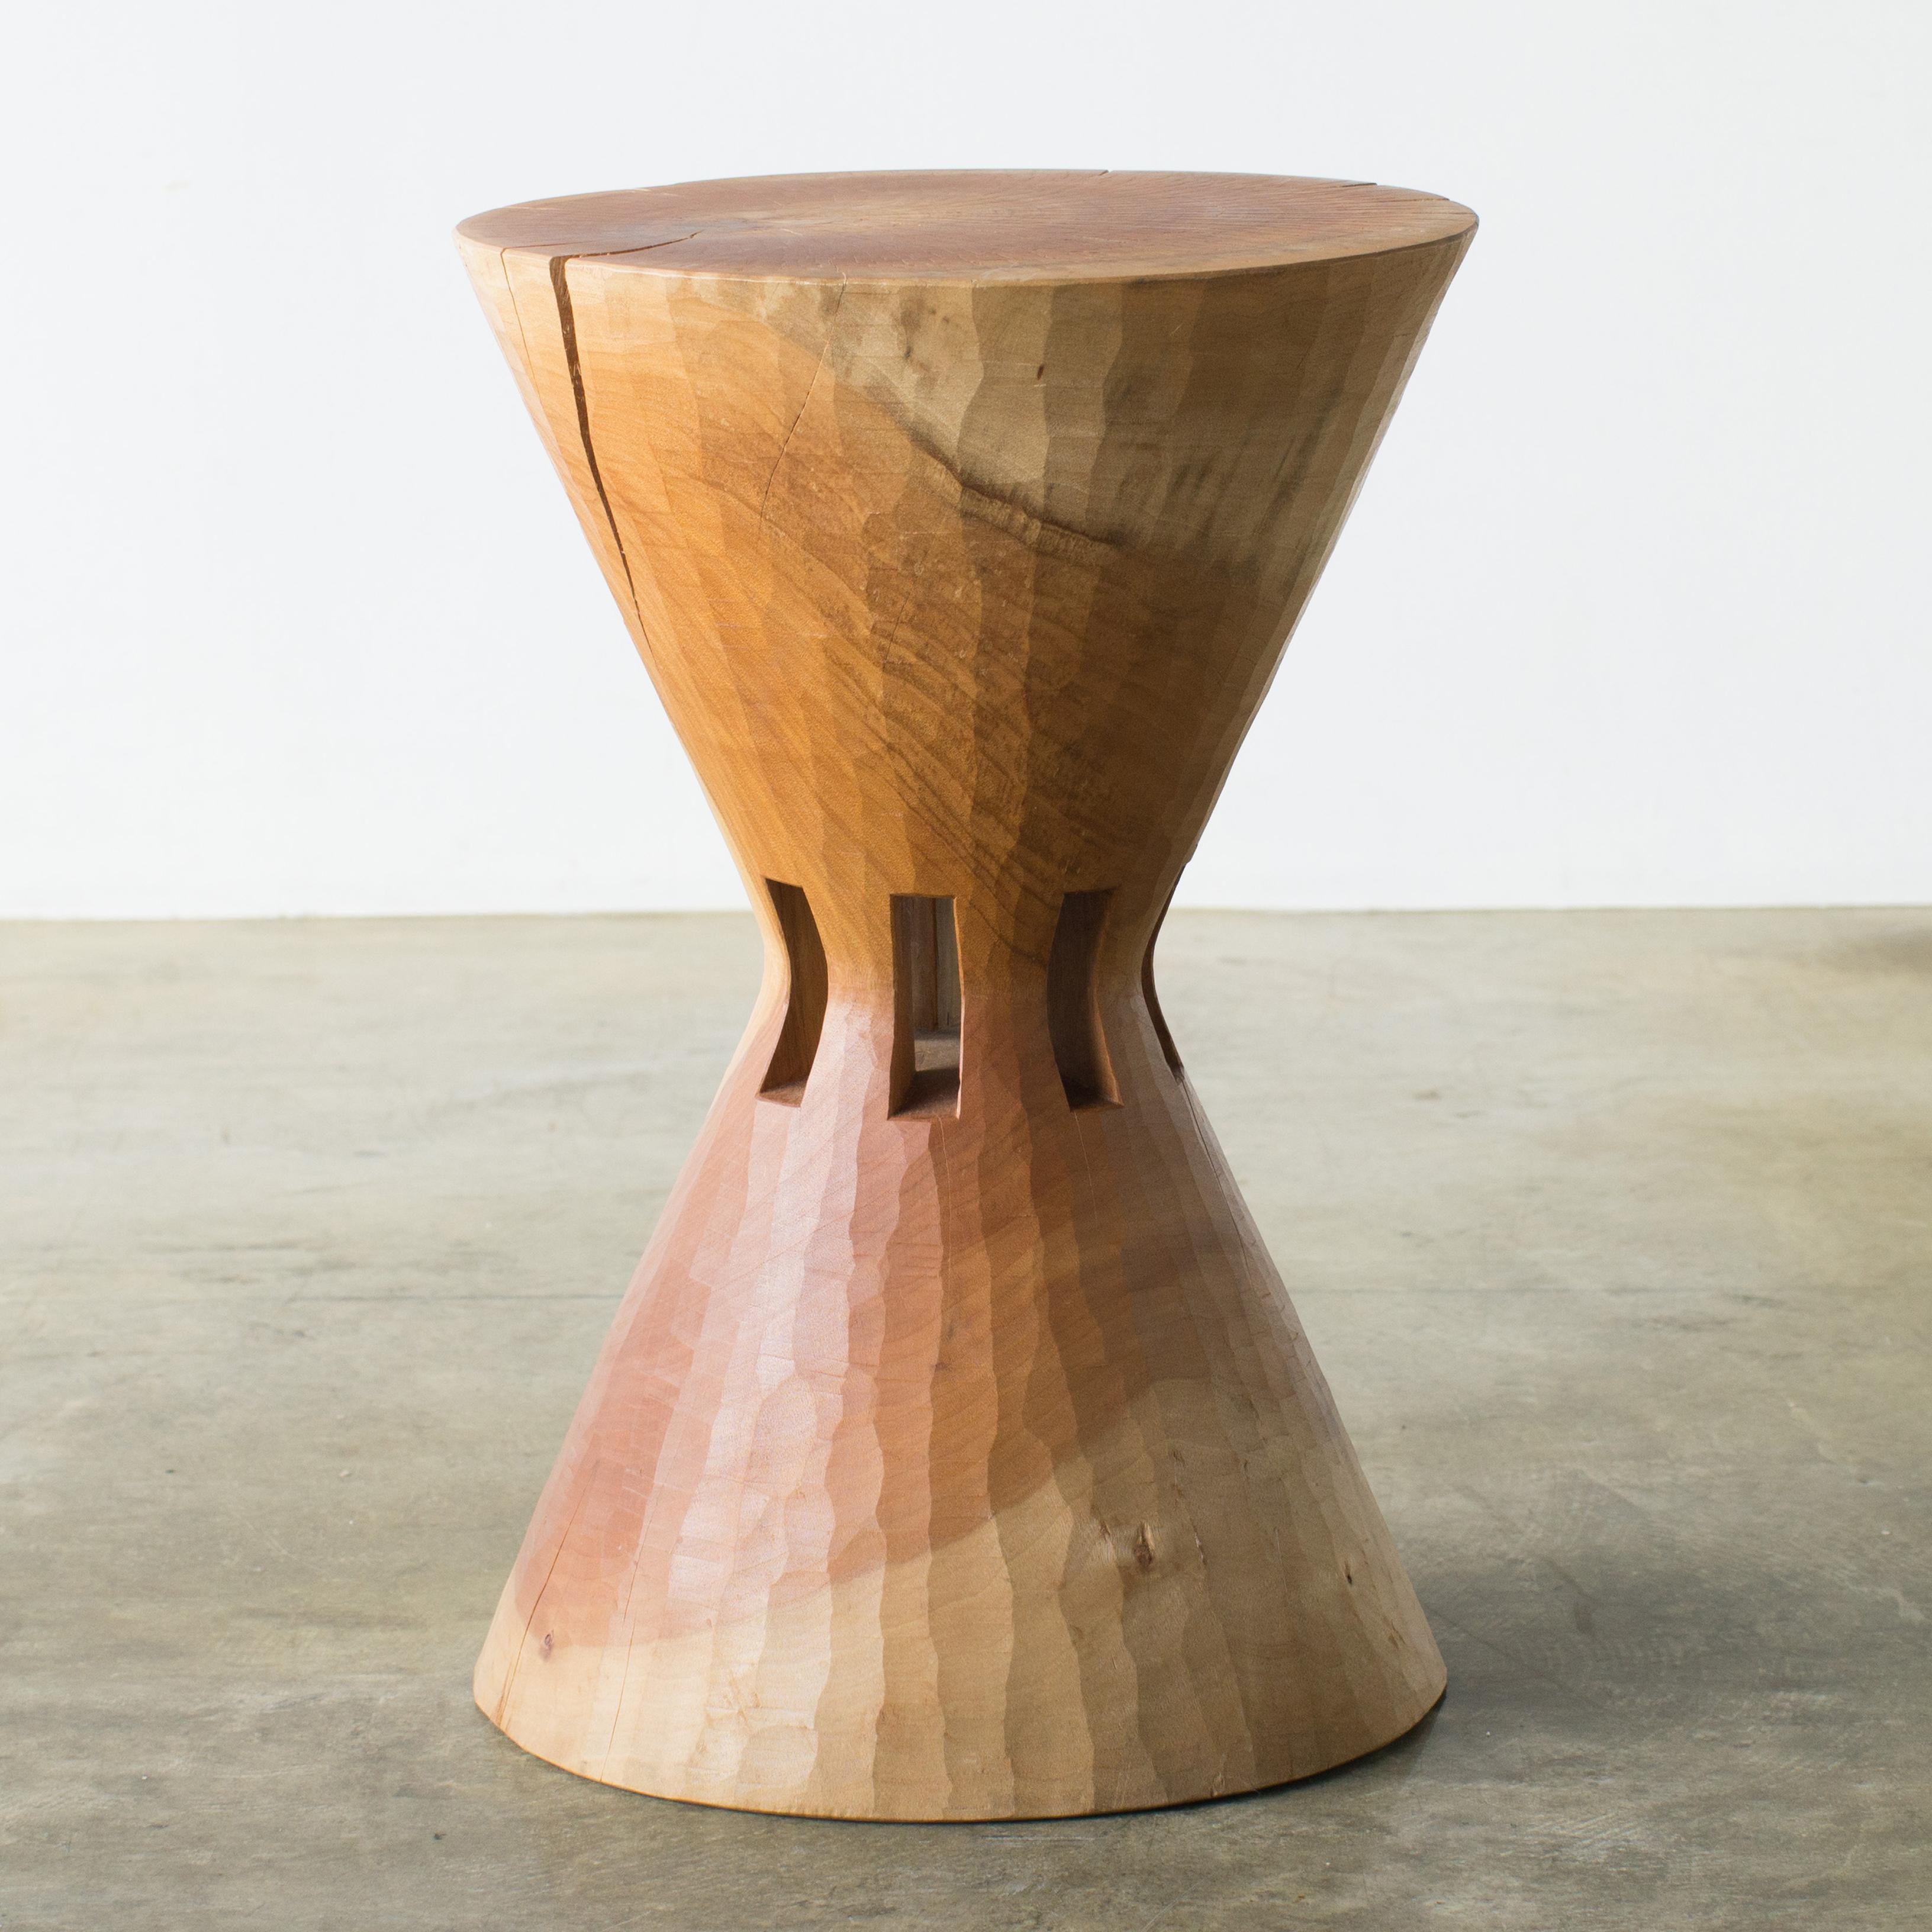 Name: A thread windings
Sculptural stool by Hiroyuki Nishimura and zone carved furniture
Material: Machilus
This work is carved from log with some kinds of chainsaws.
Most of wood used for Nishimura's works are unable to use anything, these